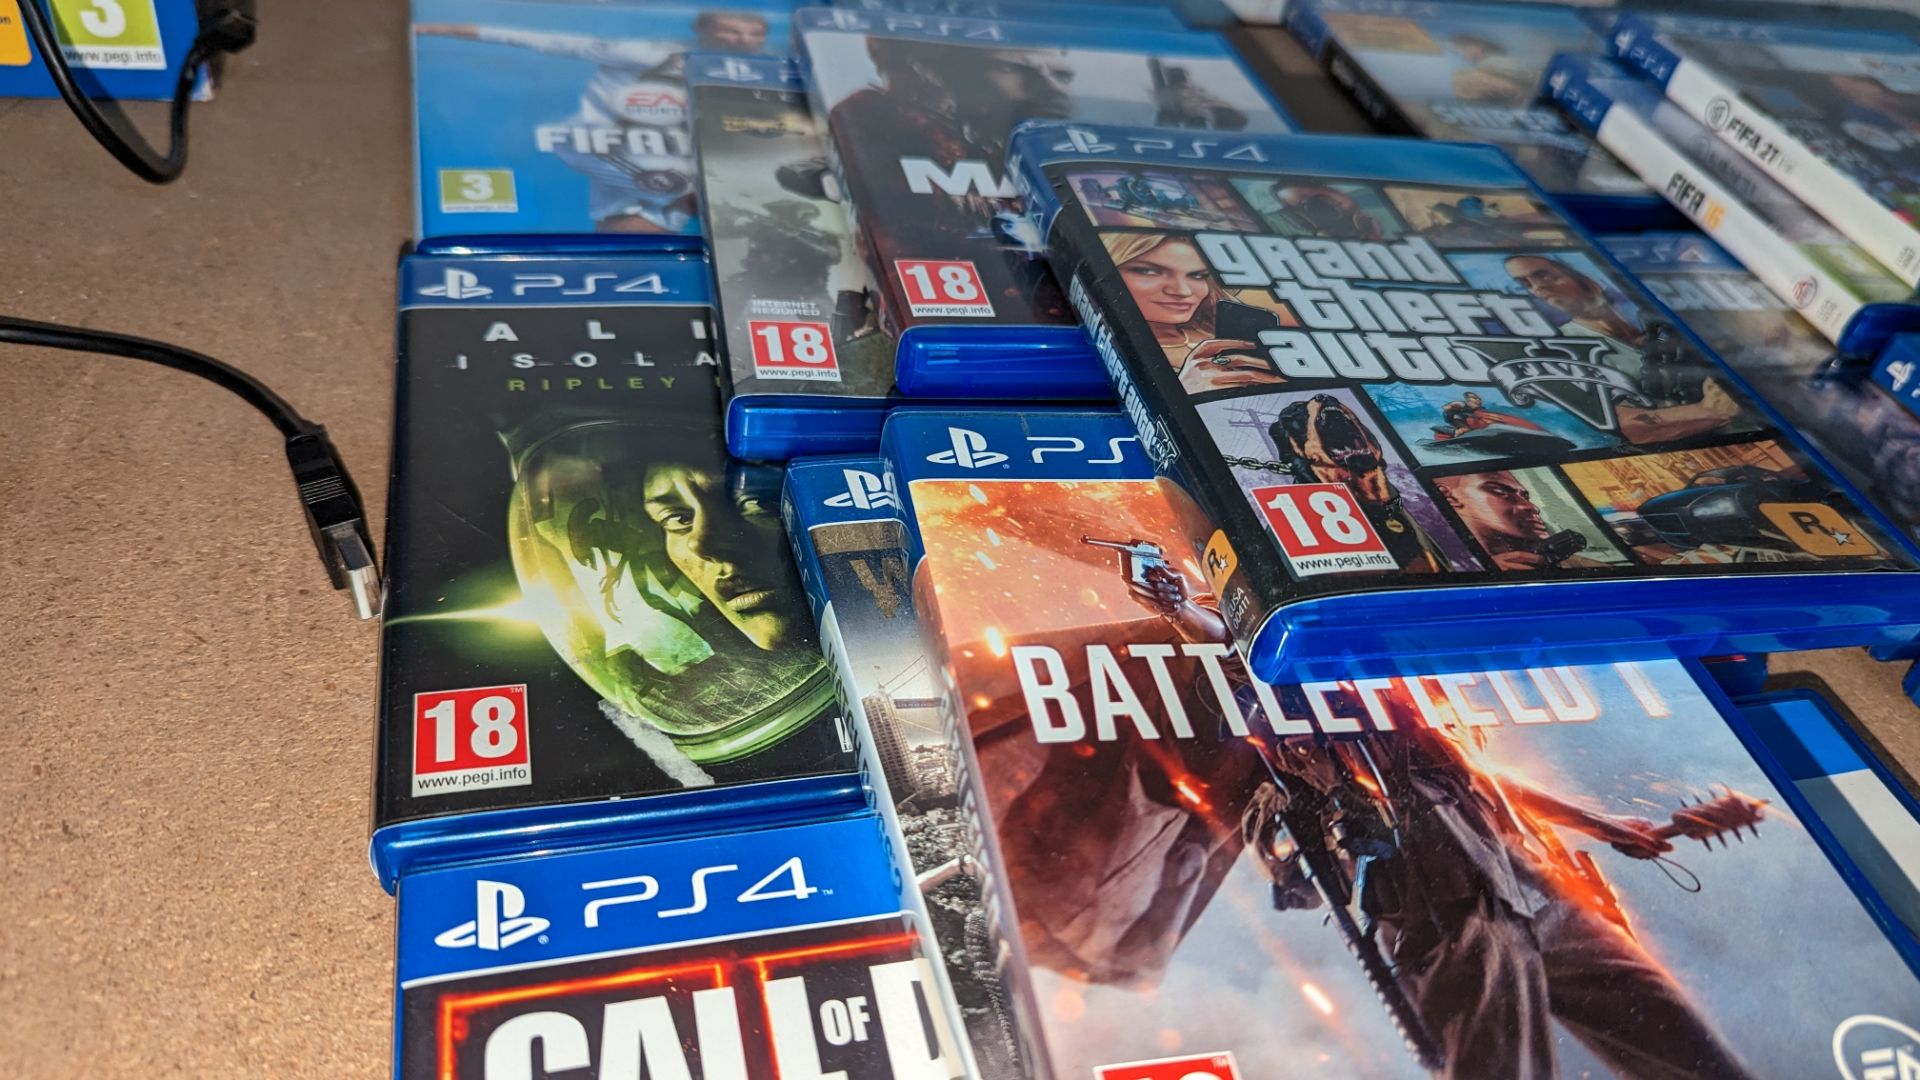 11 off boxed PS4 games as pictured - Image 5 of 10